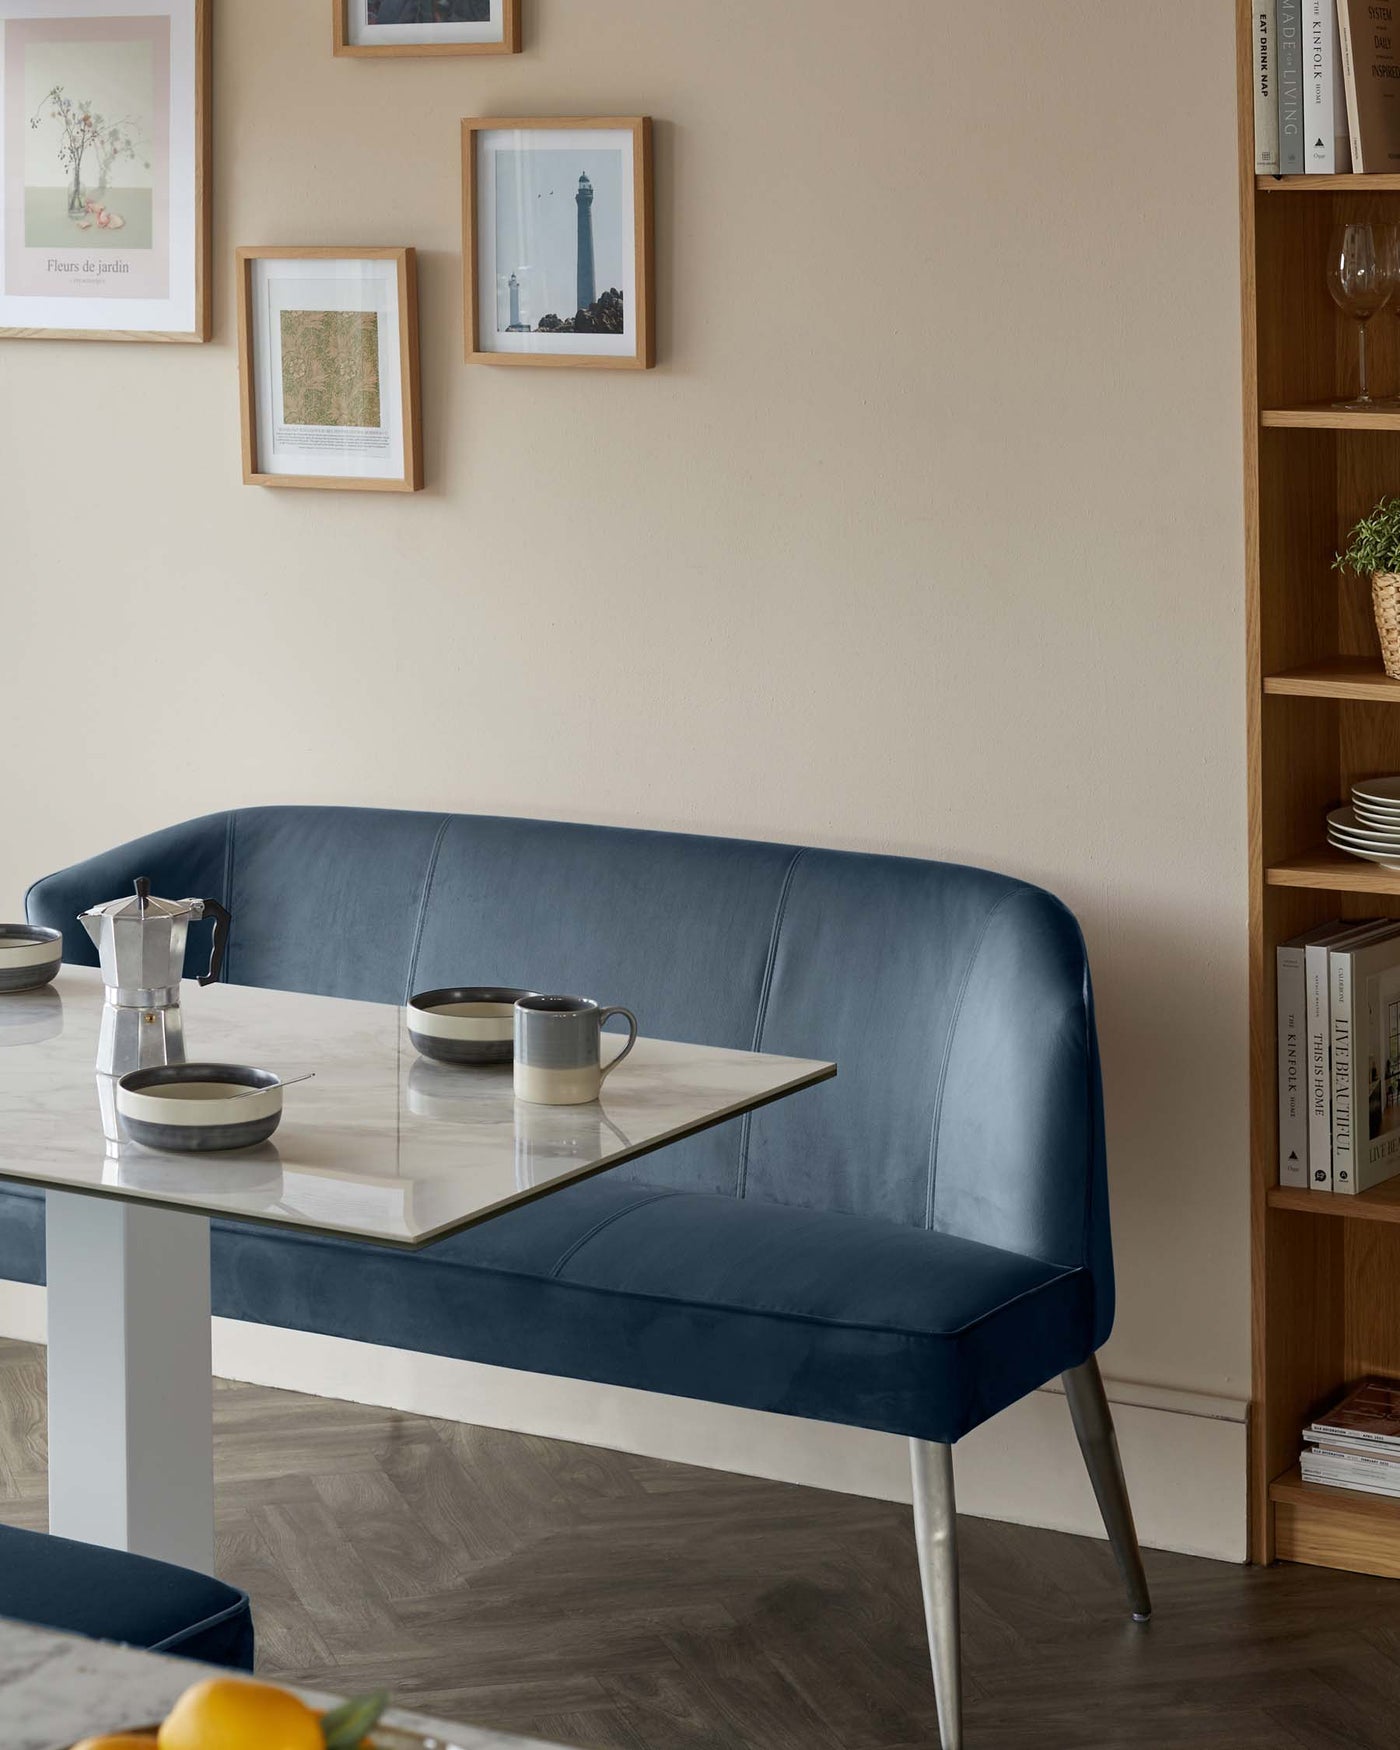 Modern dining area featuring a sleek white marble tabletop on a streamlined metal base, paired with a contemporary blue upholstered bench with slender metal legs. Adjacent to the dining set, a wooden open shelving unit with a variety of decorative items and books adds warmth to the space.